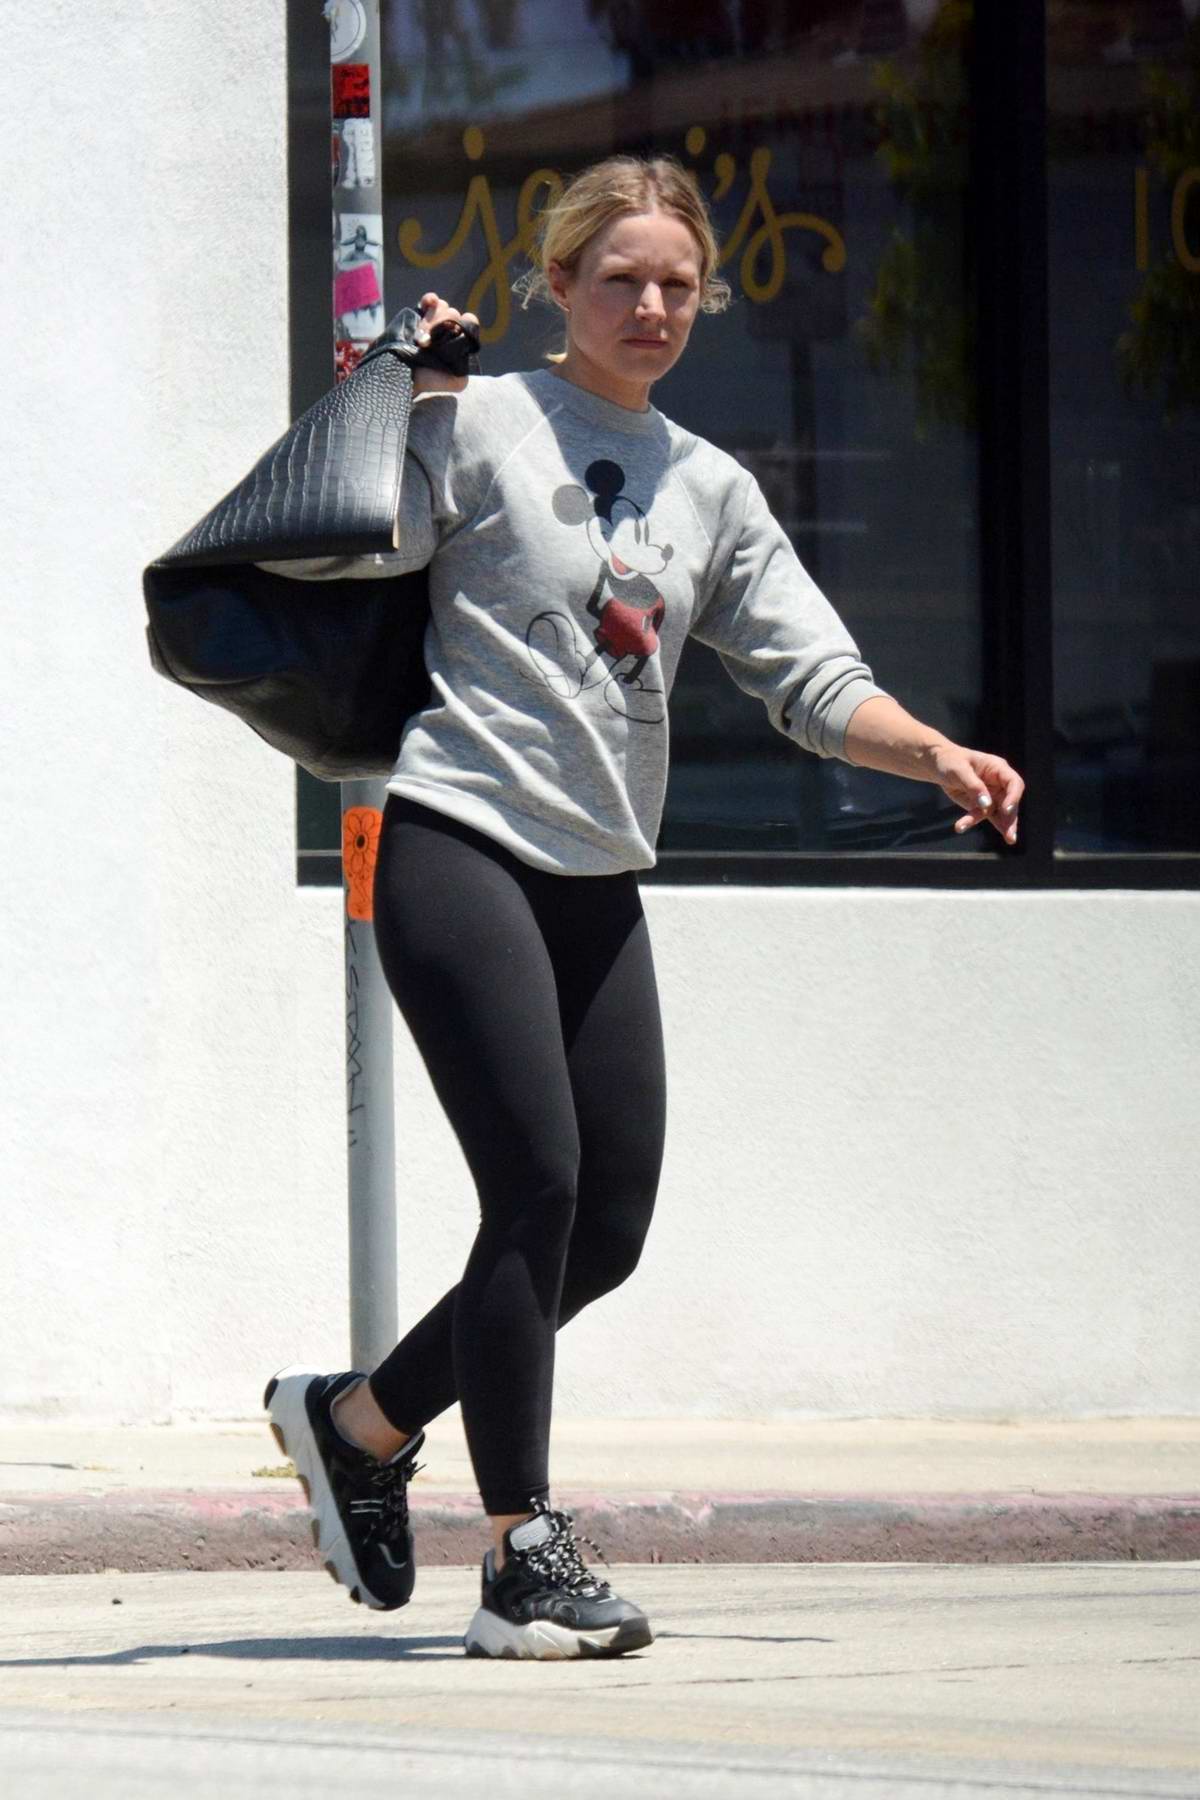 https://www.celebsfirst.com/wp-content/uploads/2019/07/kristen-bell-wears-a-mickey-mouse-sweatshirt-and-leggings-as-she-heads-to-the-gym-in-studio-city-los-angeles-240719_1.jpg